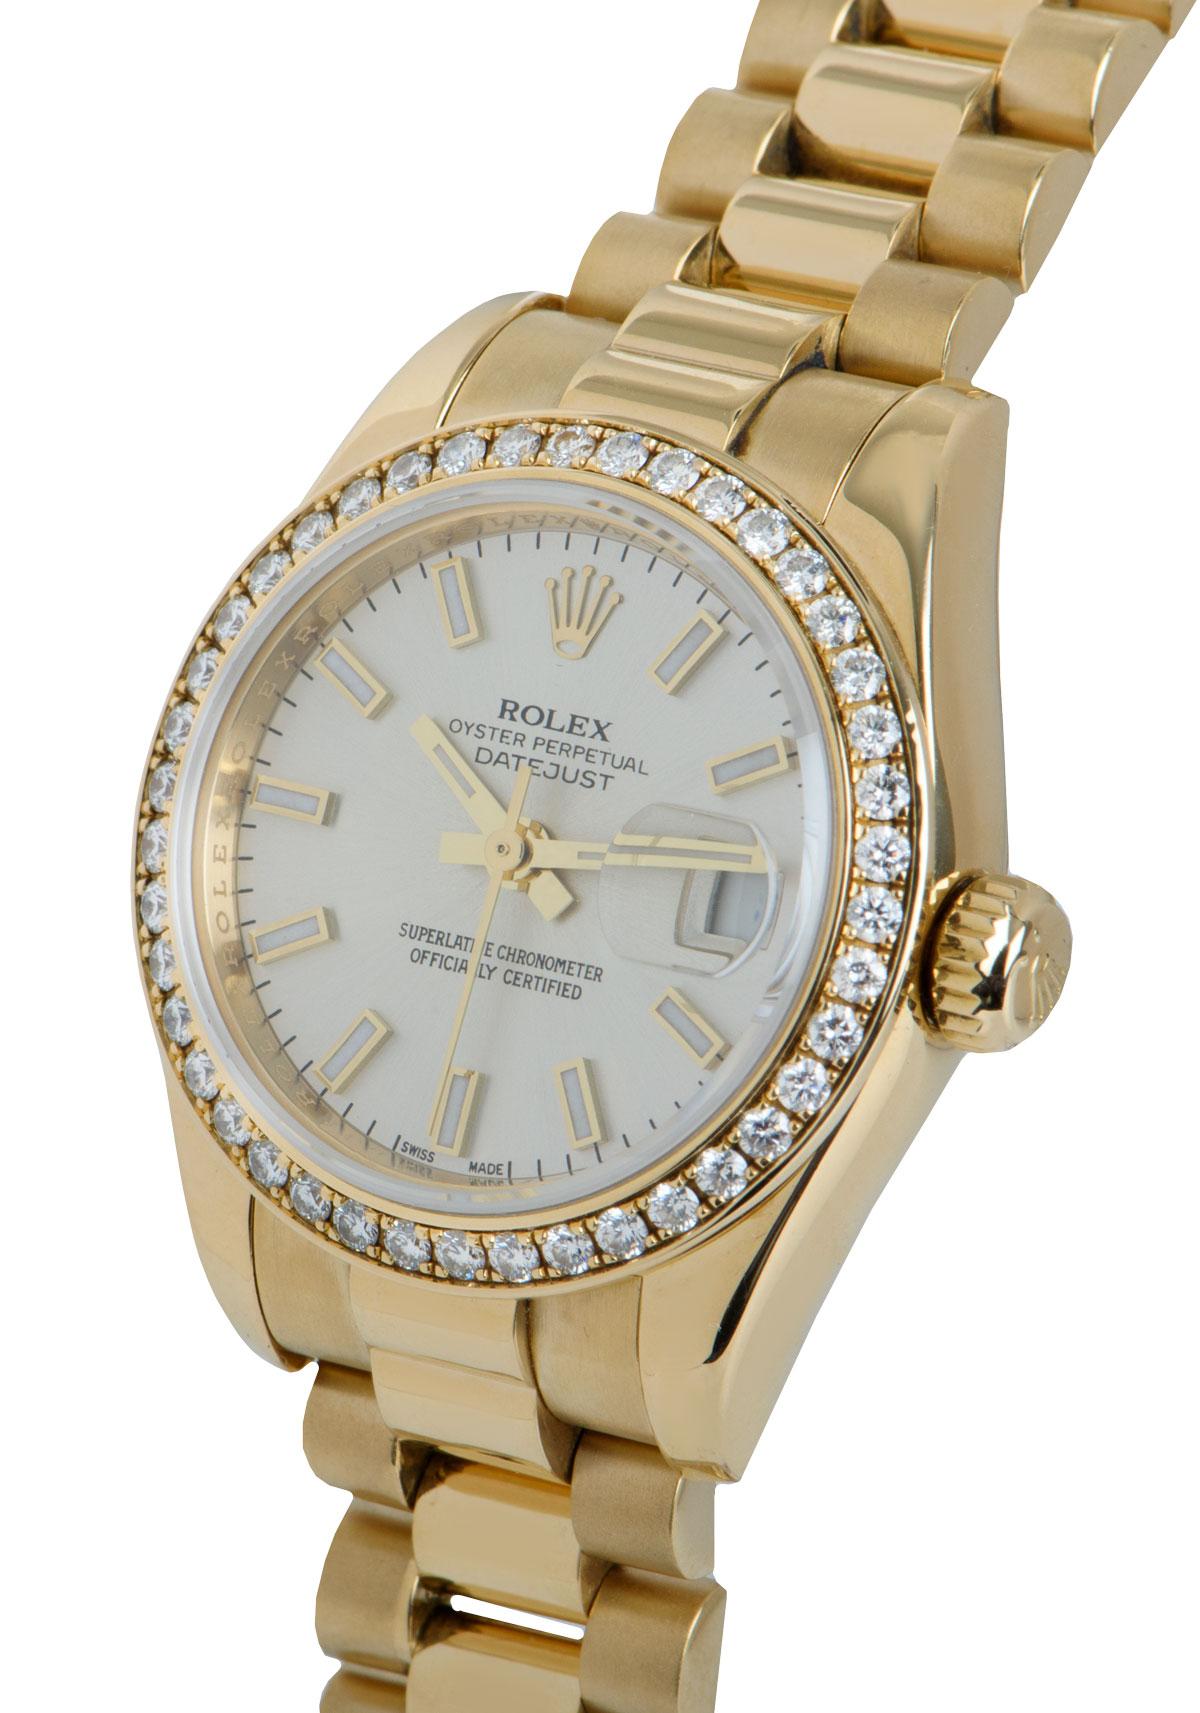 An 18k Yellow Gold Oyster Perpetual Datejust Ladies Wristwatch, silver dial with applied hour markers, date at 3 0'clock, a fixed 18k yellow gold bezel set with 42 round brilliant cut diamonds, an 18k yellow gold president bracelet with a concealed